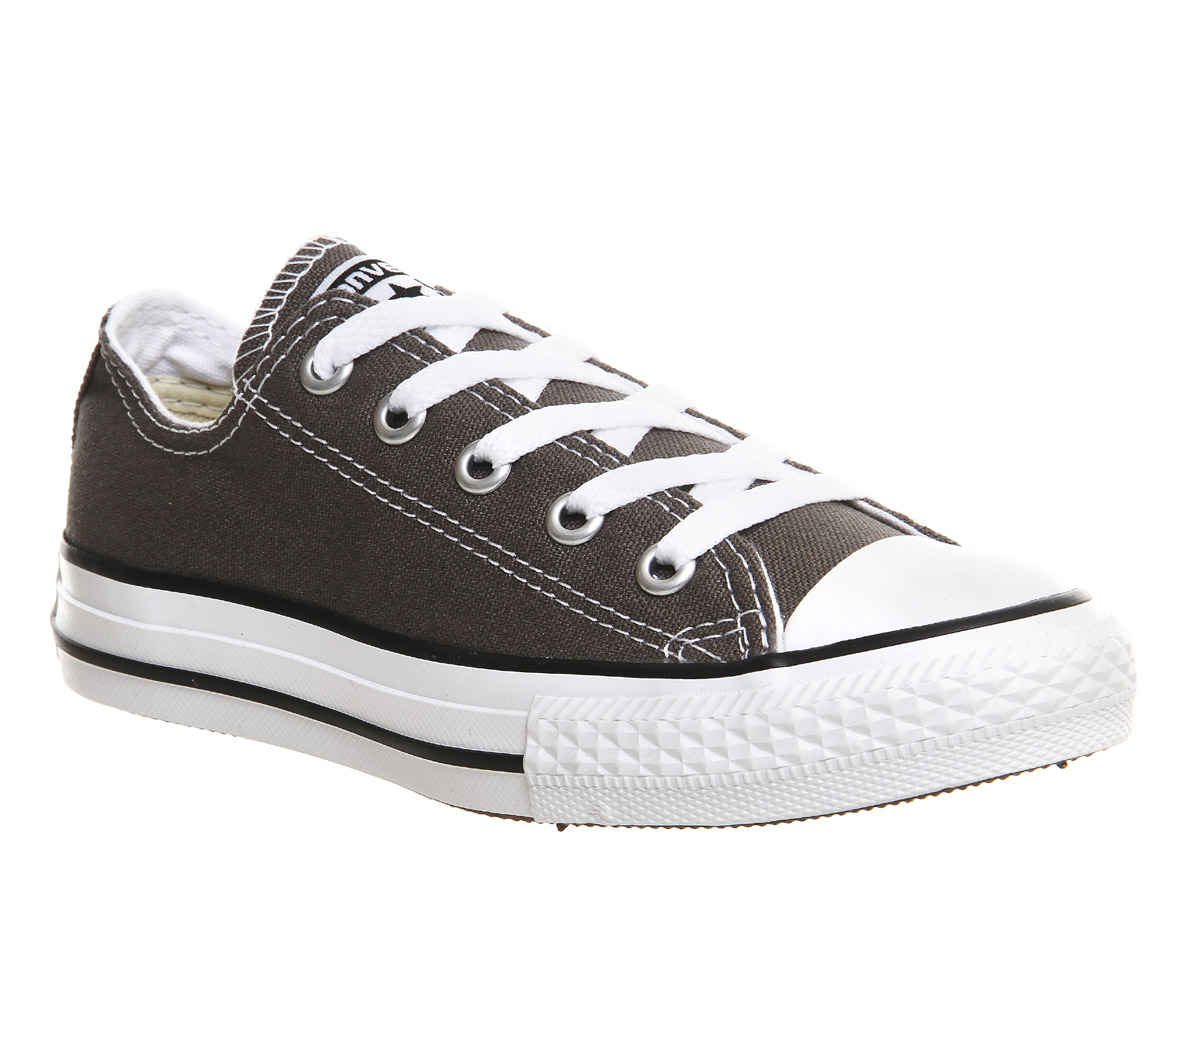 ConverseAll Star Low YouthCharcoal